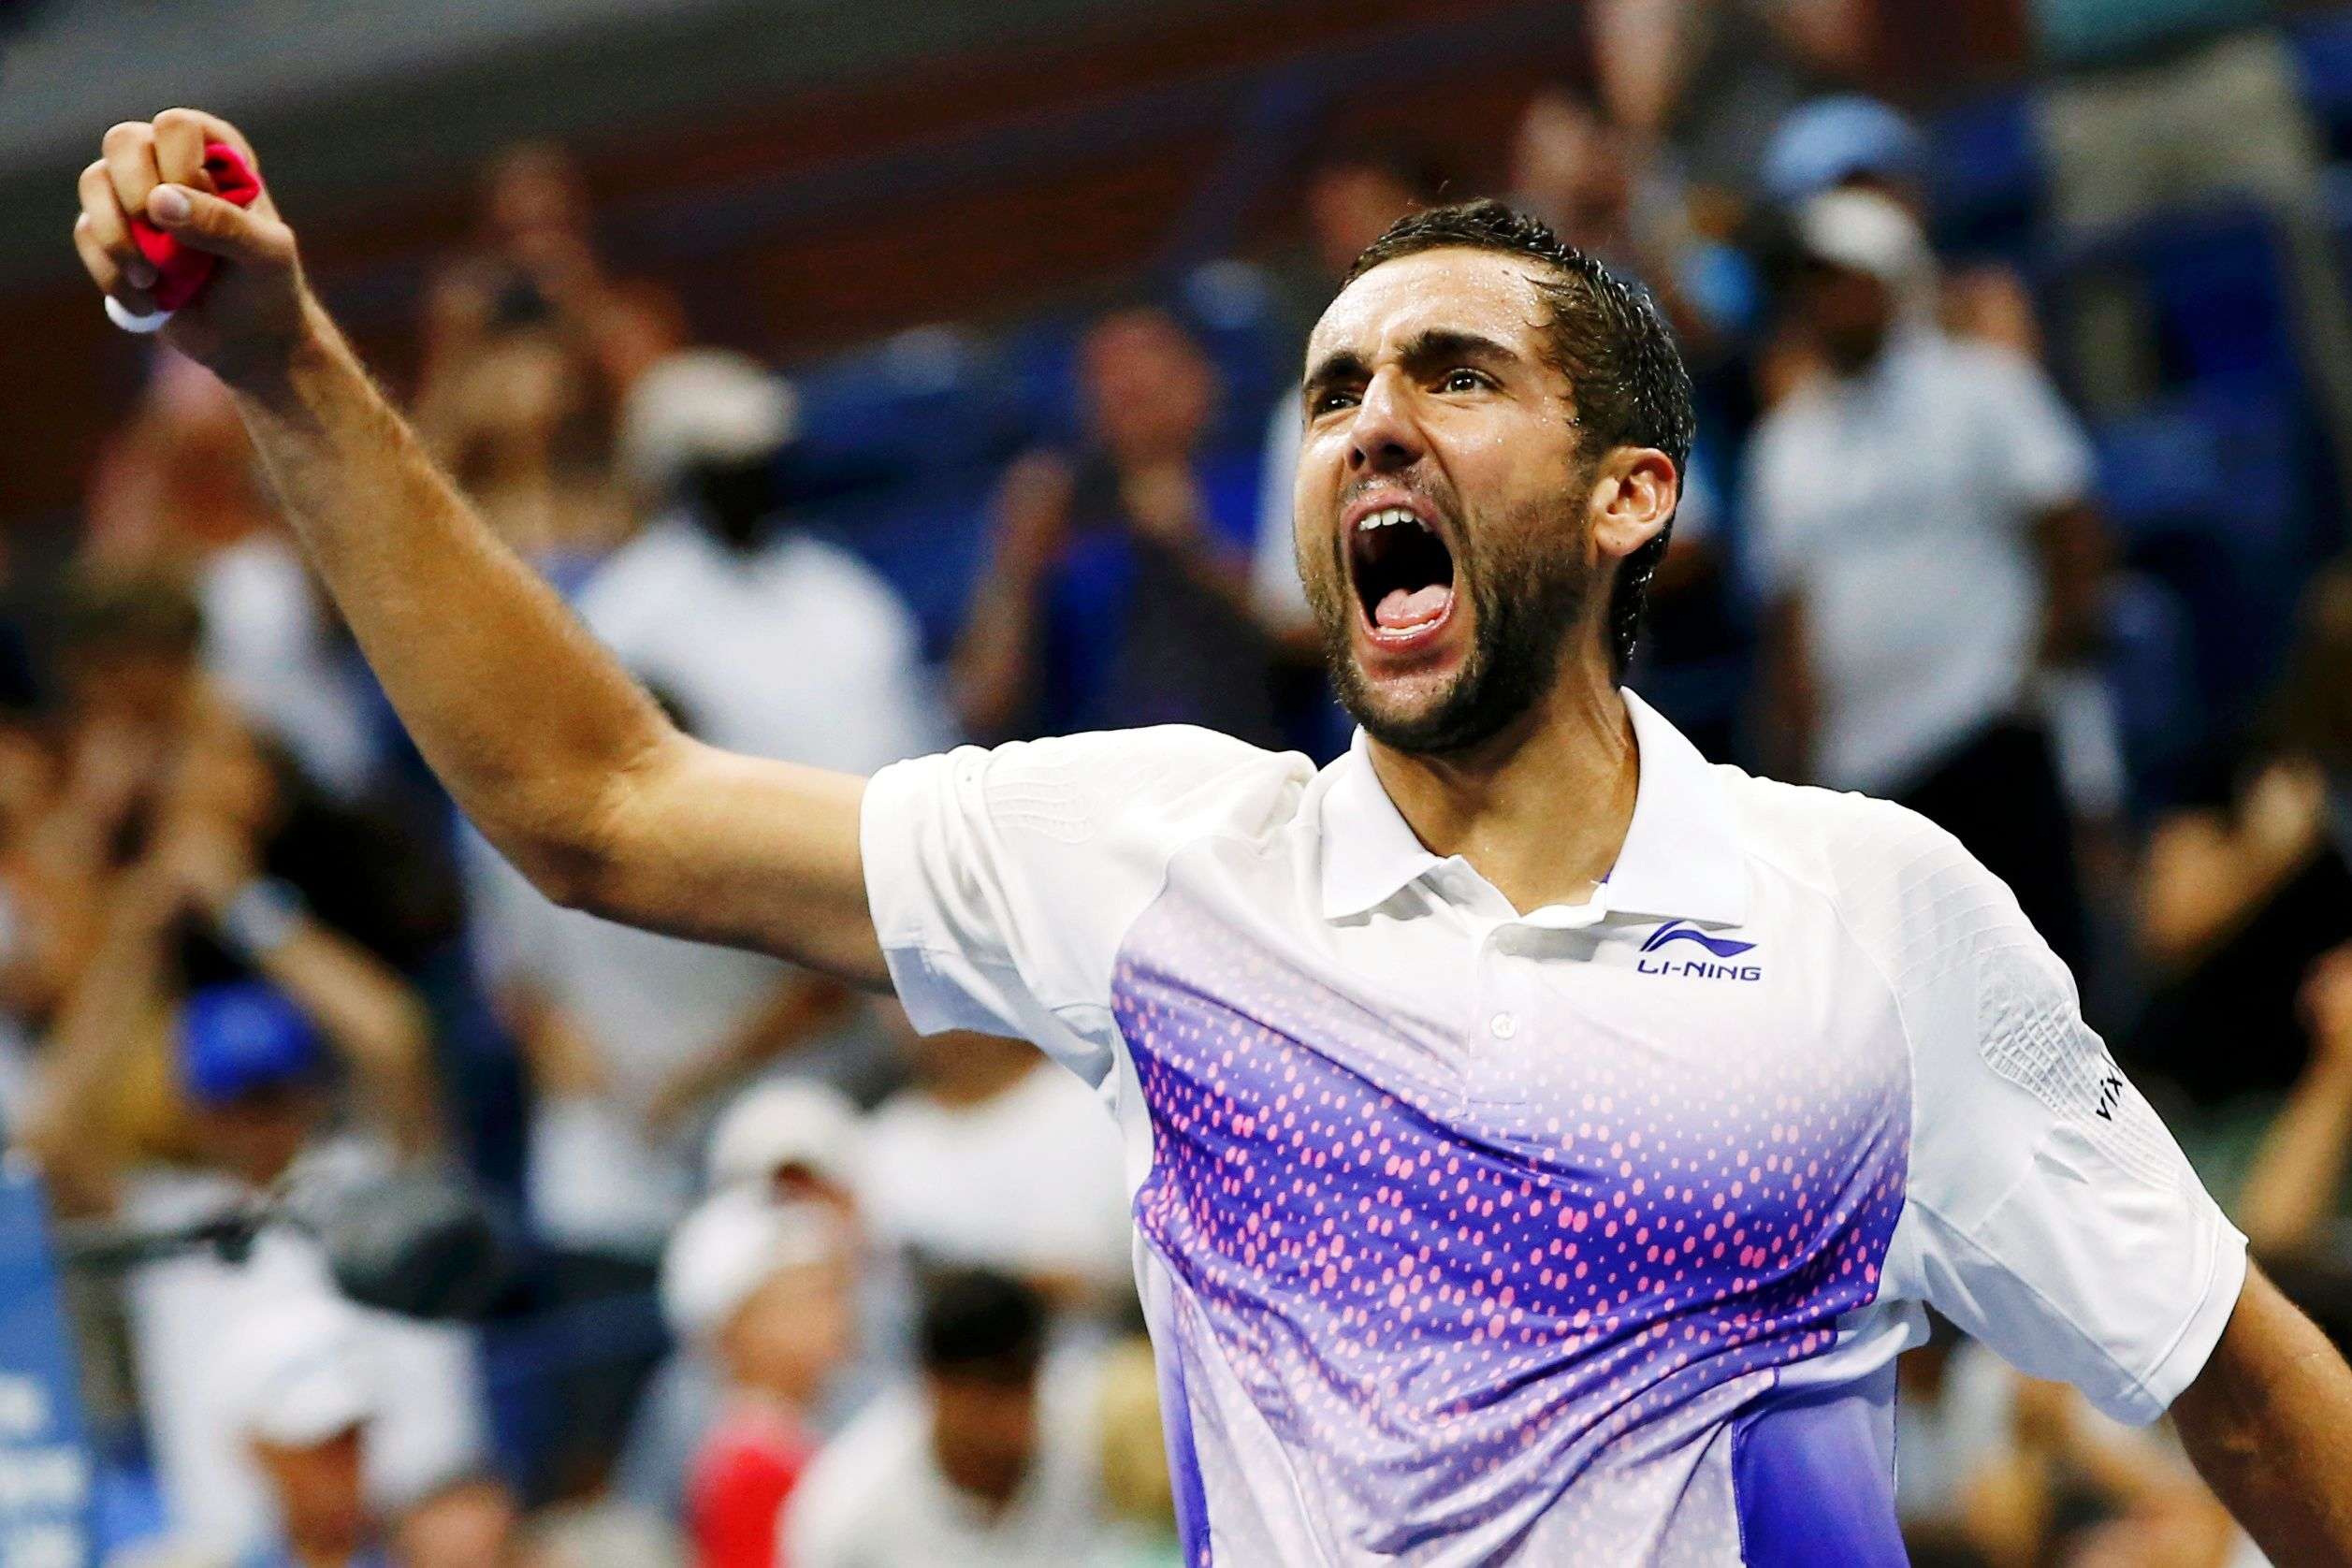 Marin Cilic of Croatia celebrates after defeating Jo-Wilfried Tsonga of France in five sets during their quarterfinals match at the U.S. Open Championships tennis tournament in New York, September 8, 2015.      REUTERS/Mike Segar